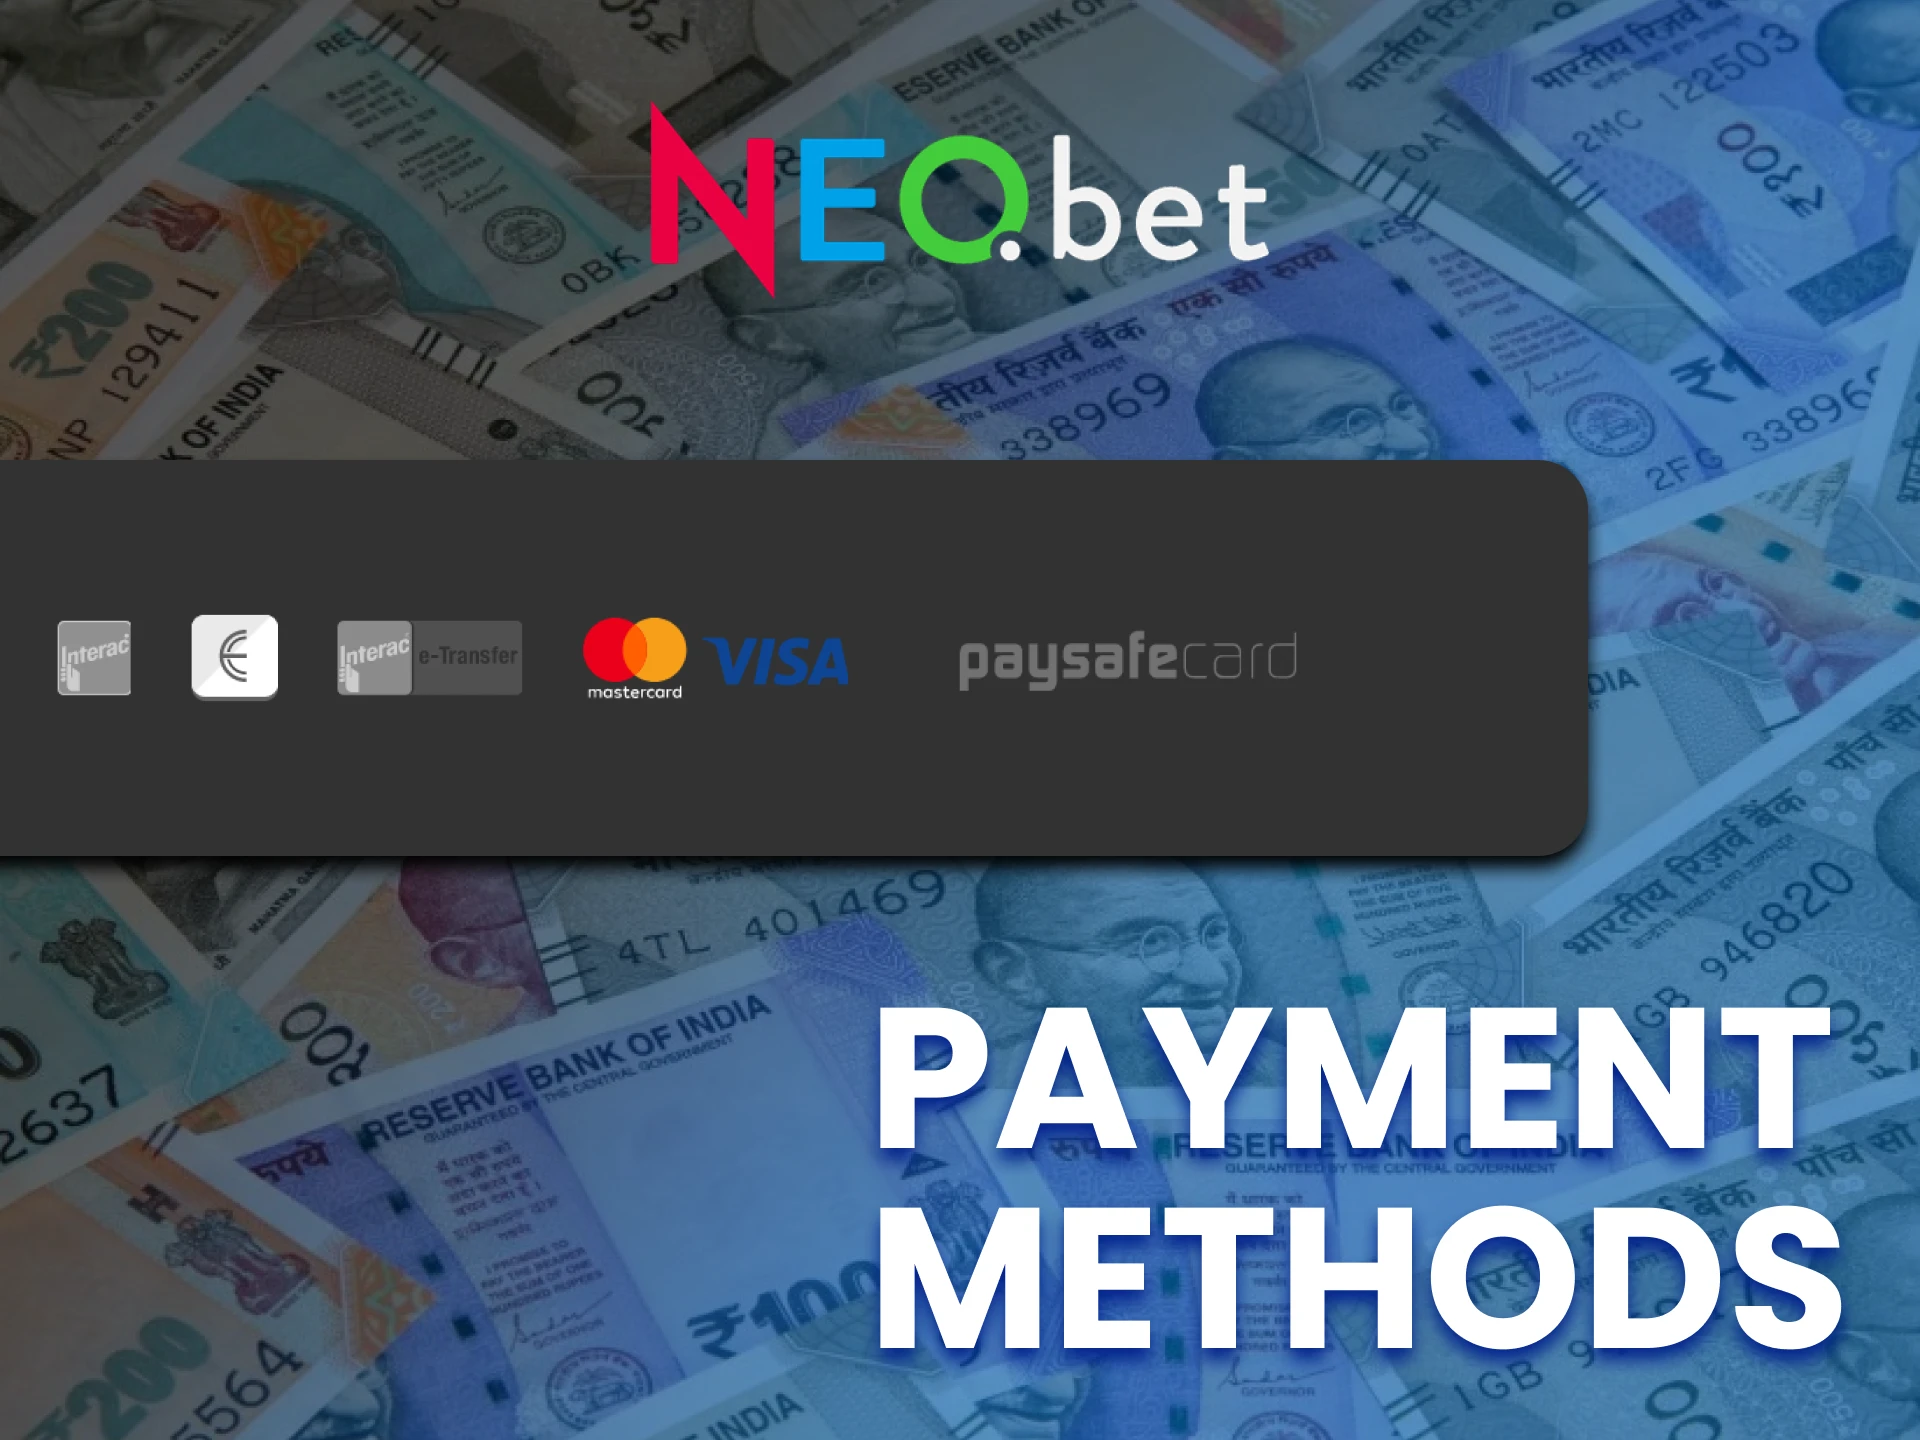 Find out how easy it is to top up your NEO.bet account and withdraw money.